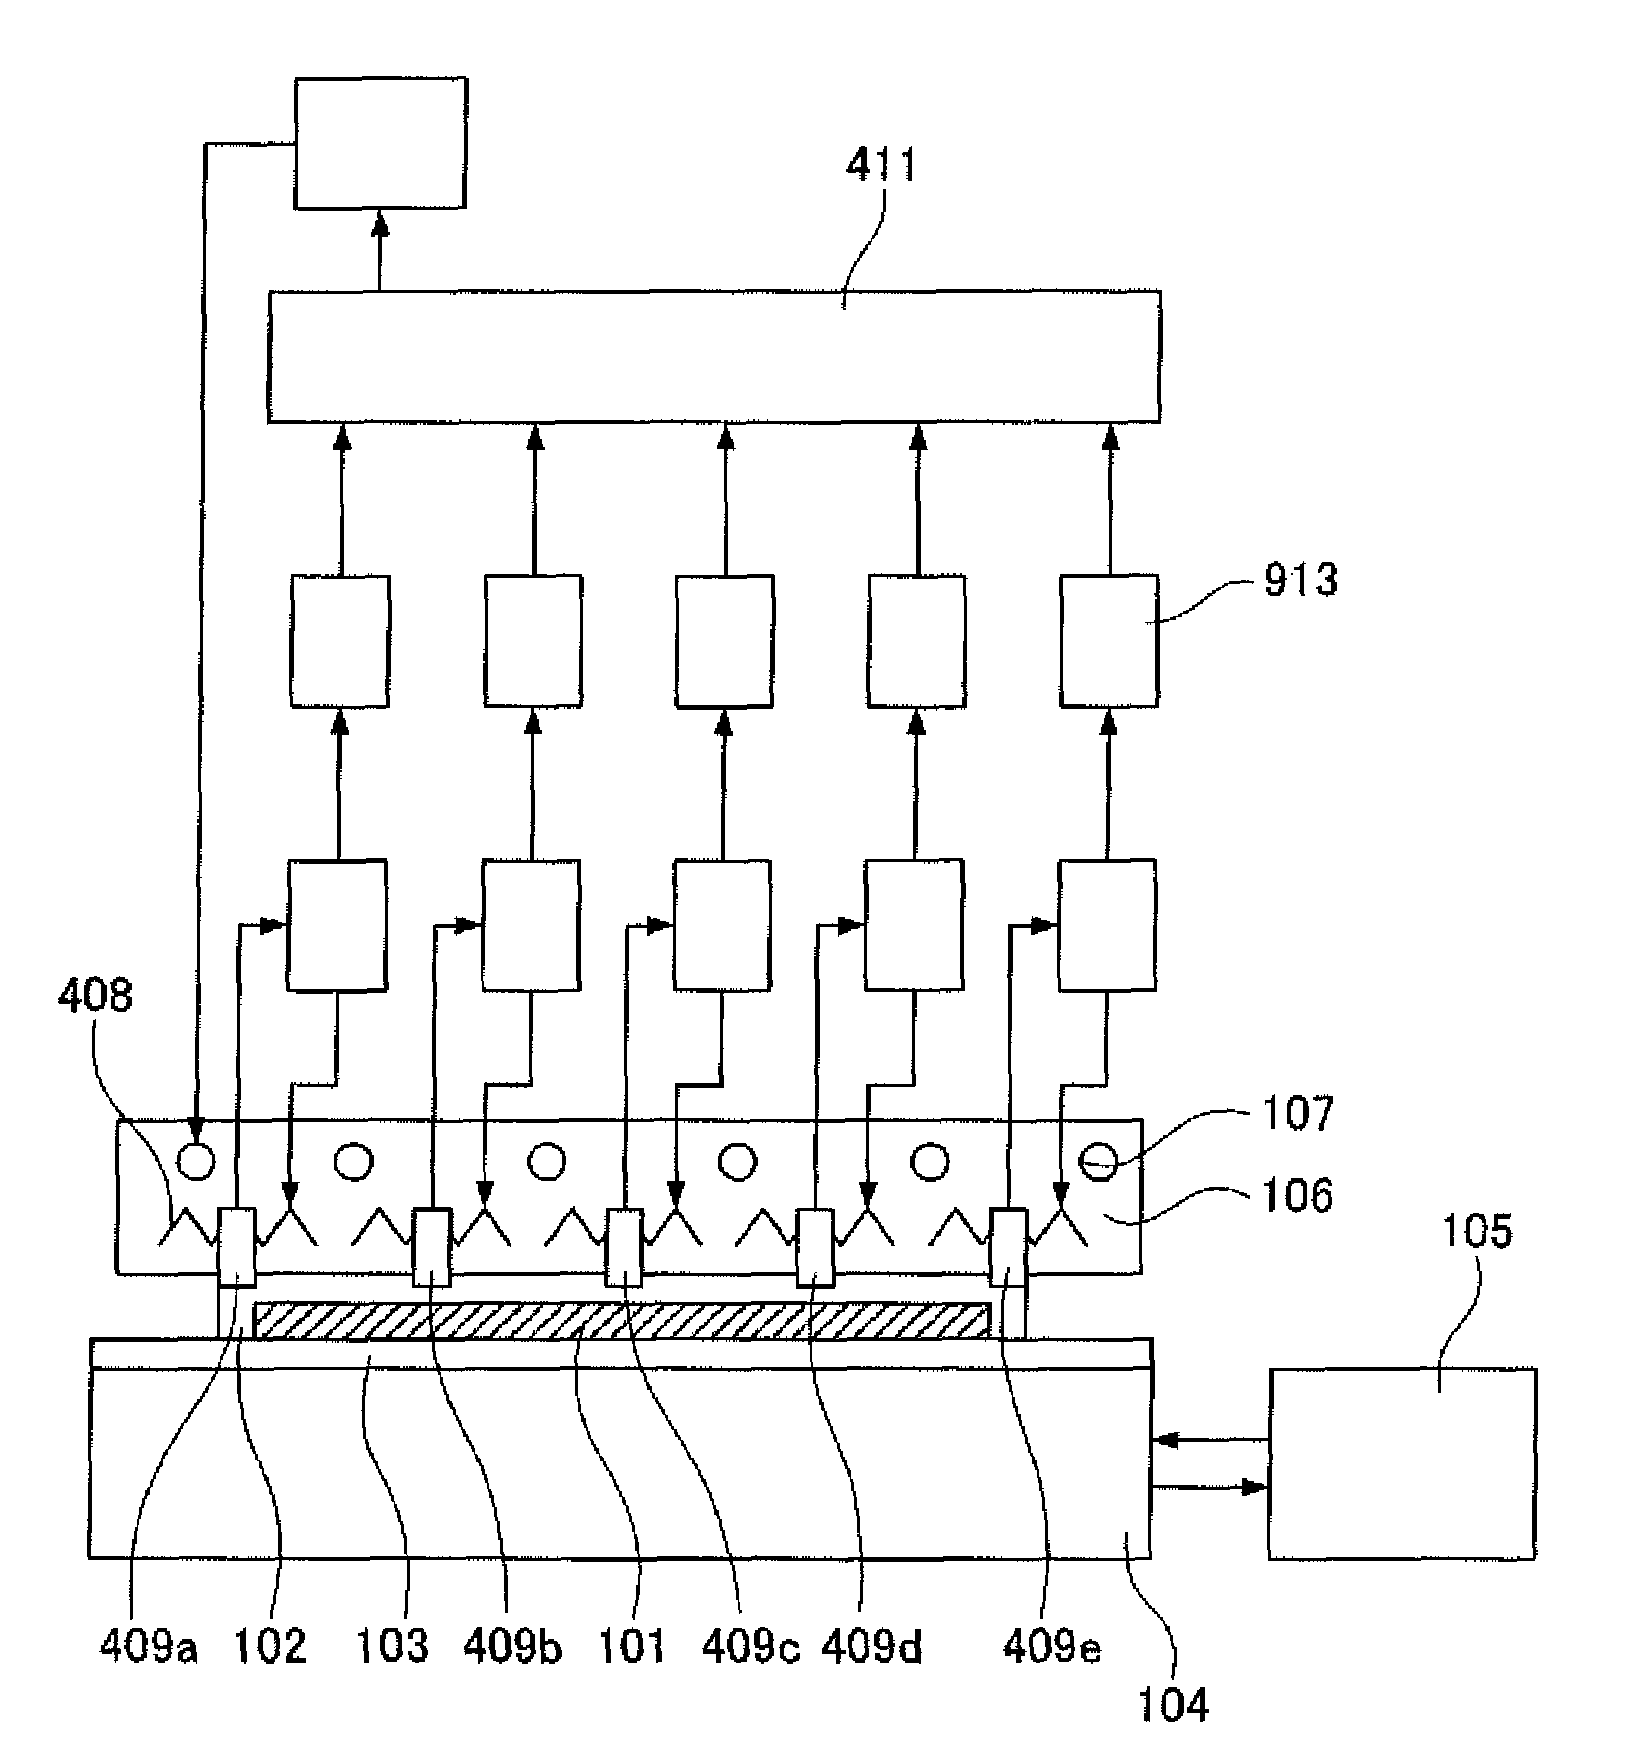 Method and apparatus for wafer level burn-in